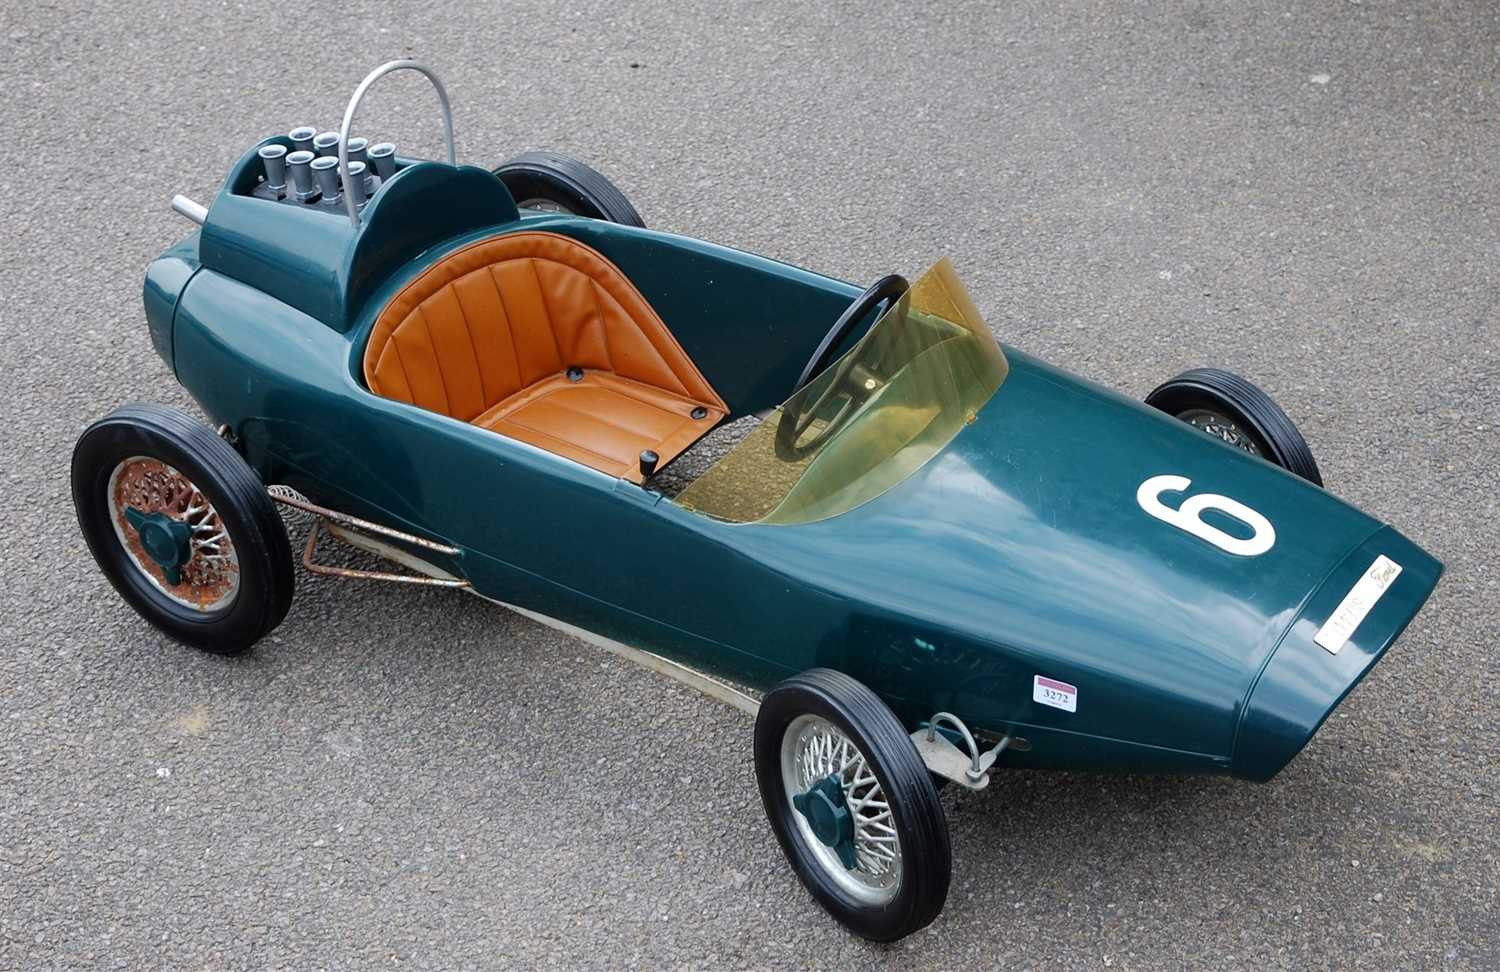 PINES by G.Perego (Italy), Pedal Car, made/issued in 1968. 1963 Lotus 29 Indianapolis #6 in